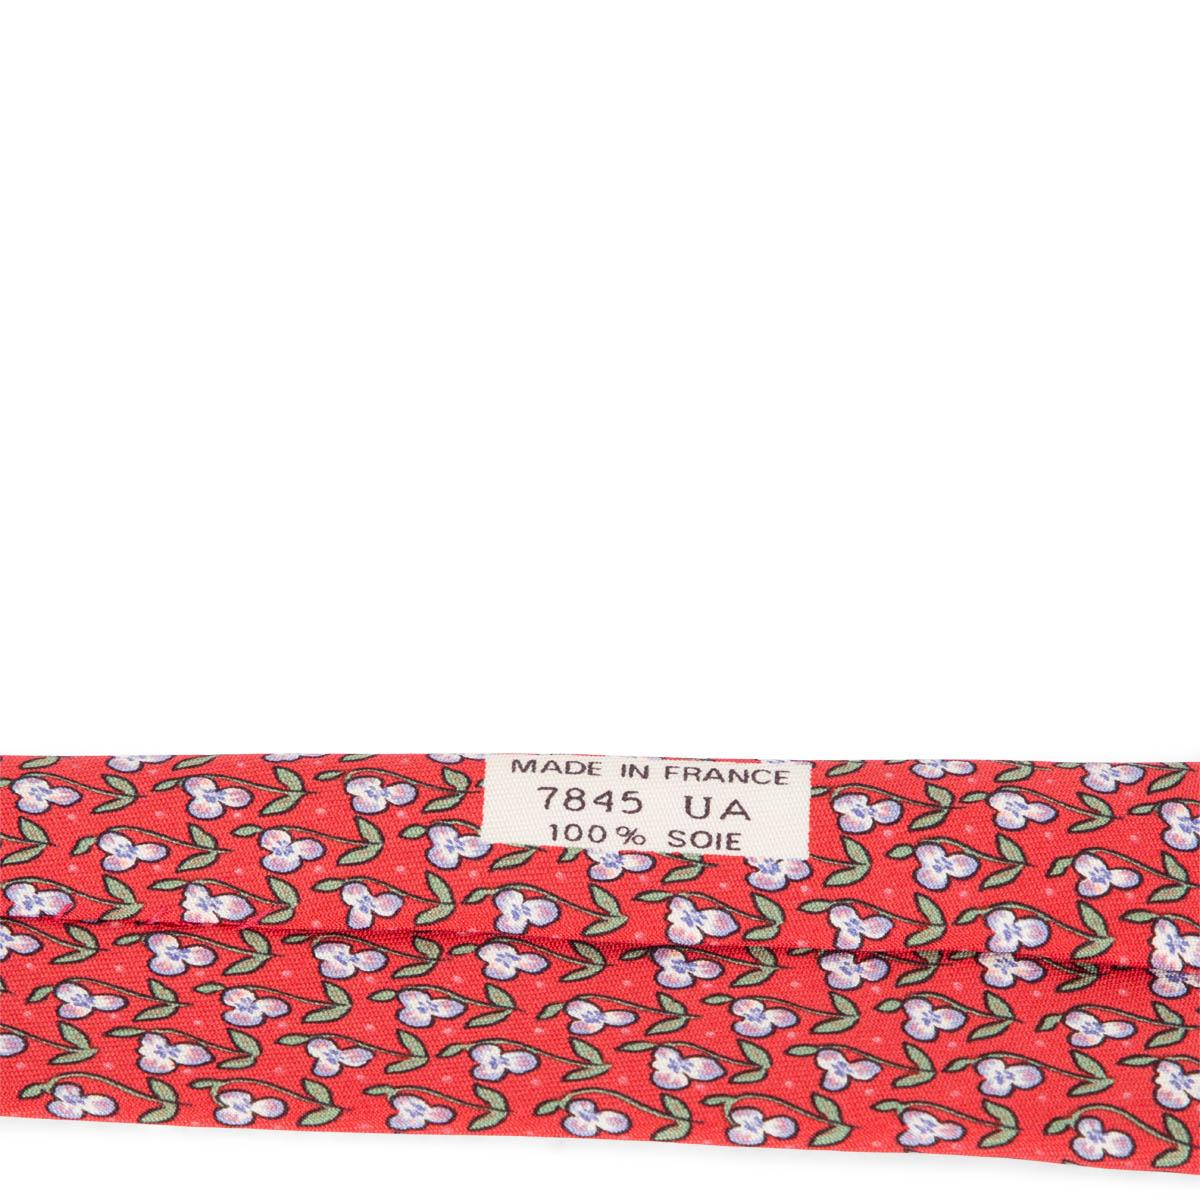 Women's HERMES red silk twill 7845 FLORAL Tie For Sale